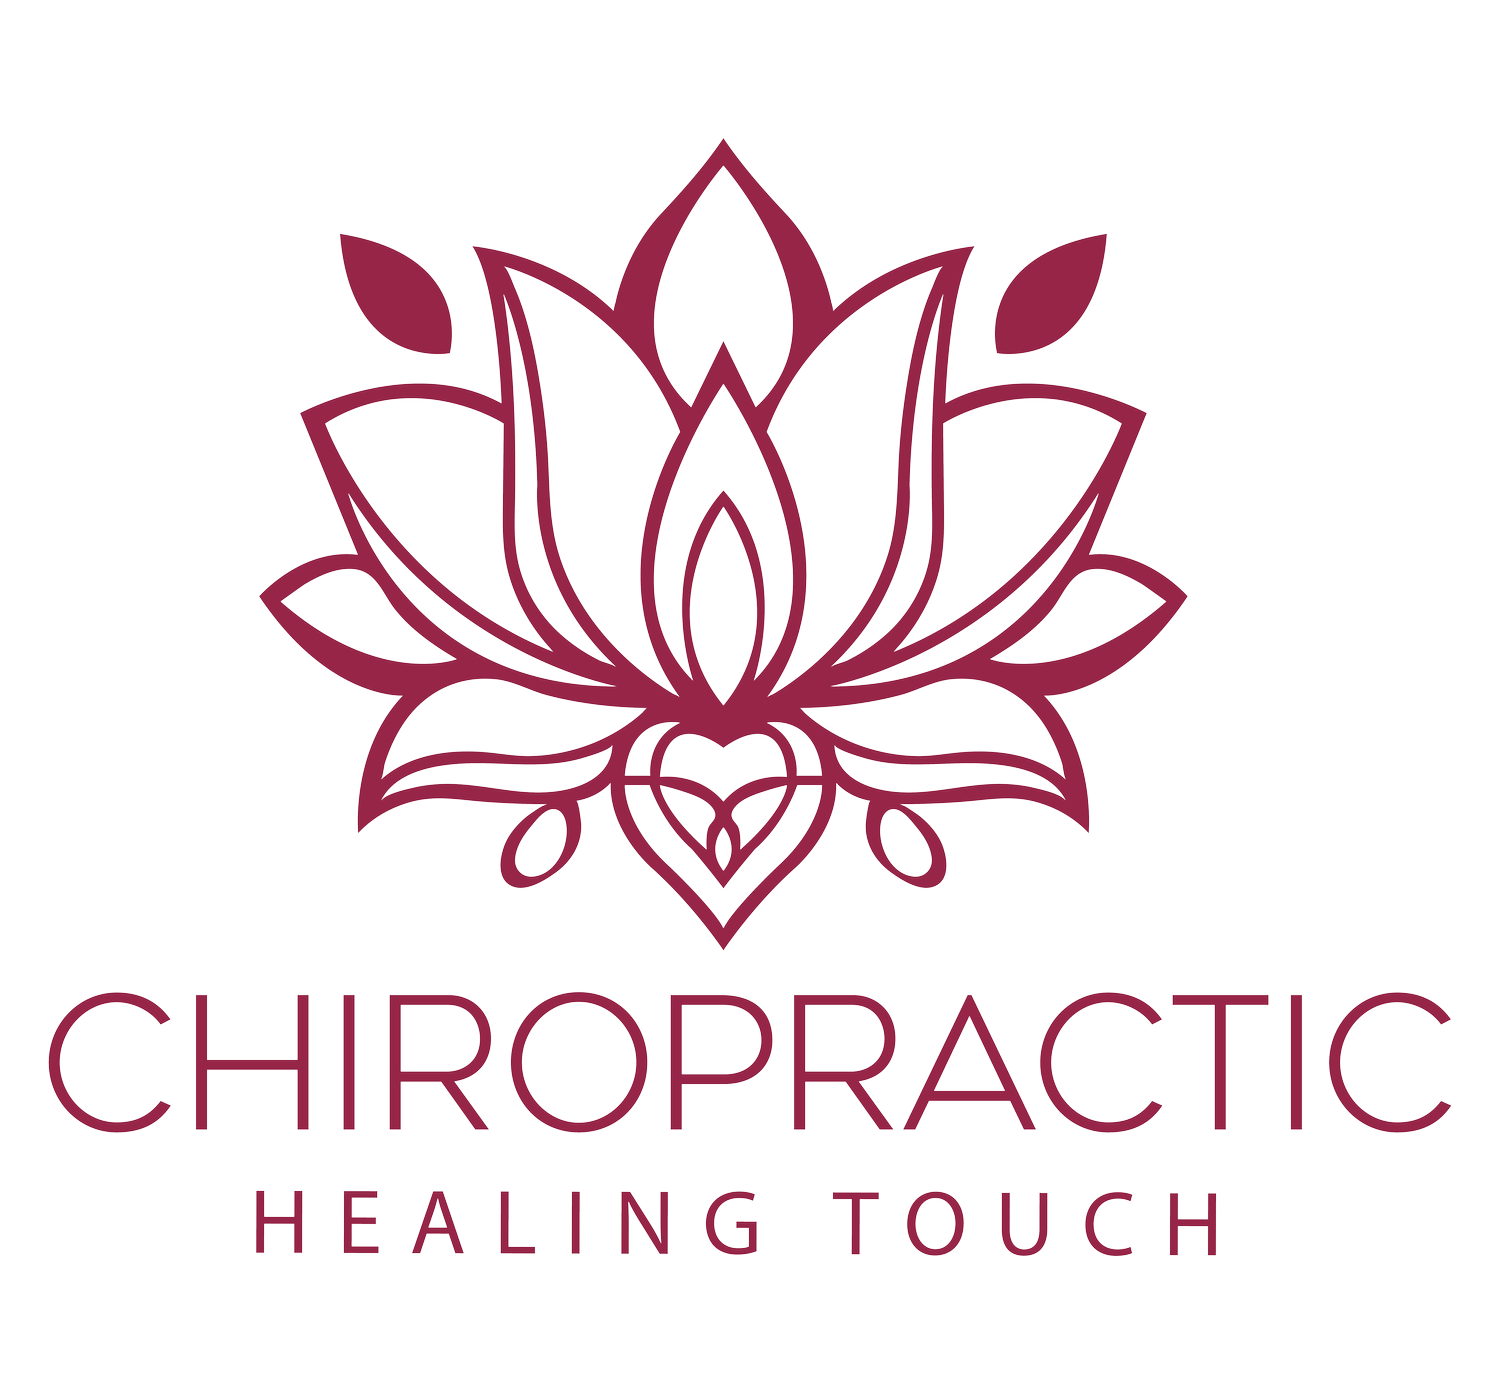 Chiropractic Healing Touch